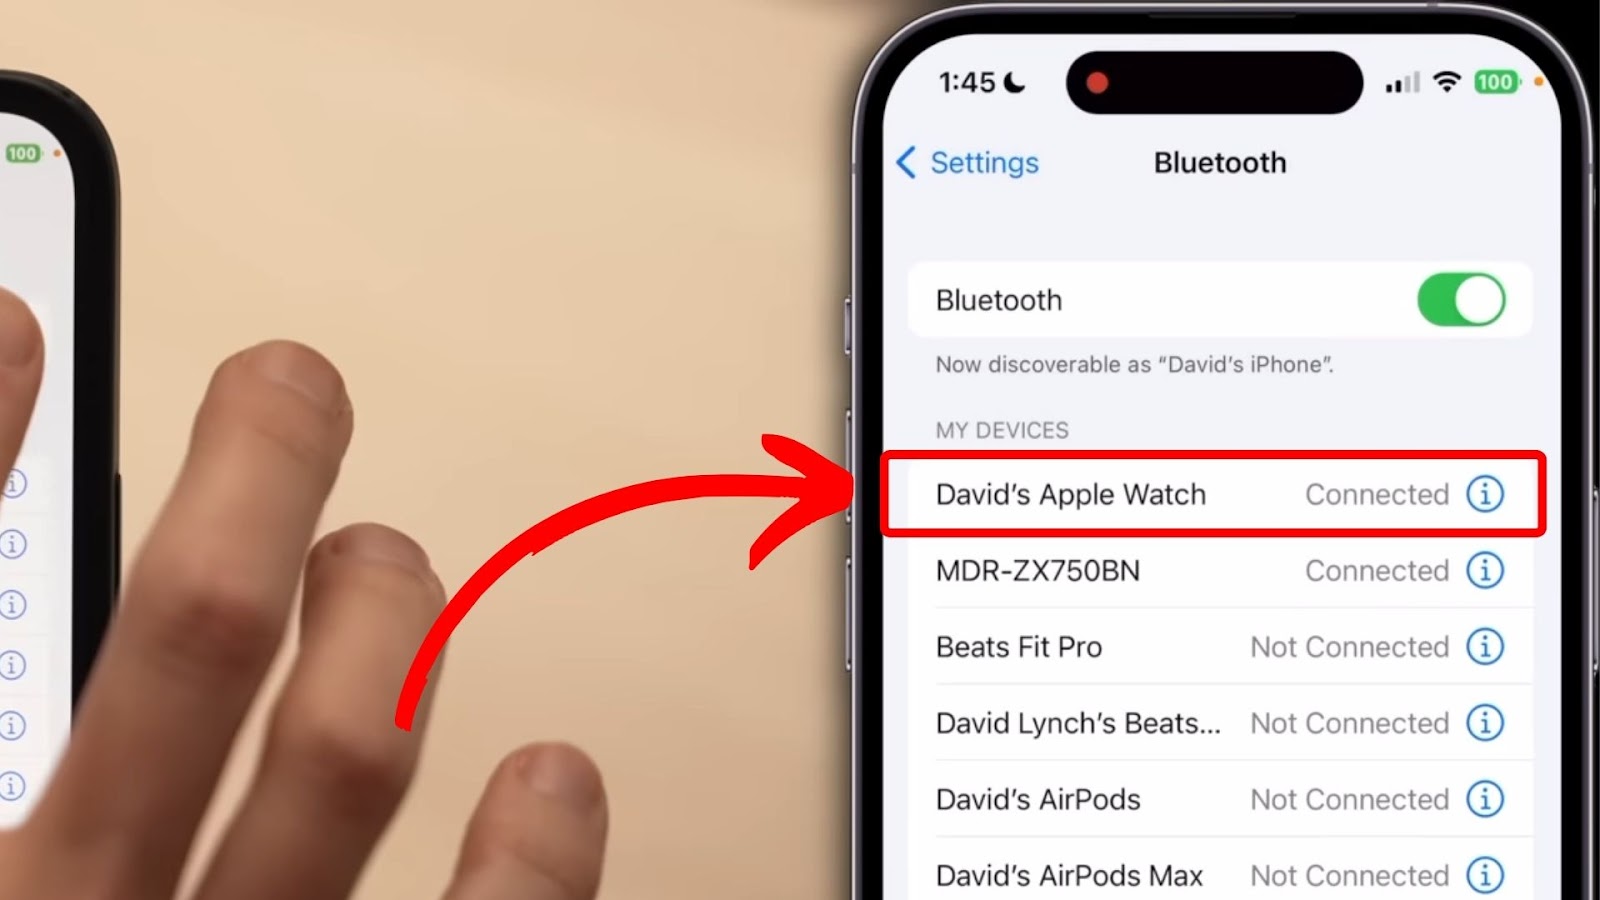 How to Turn On Bluetooth on an iPhone